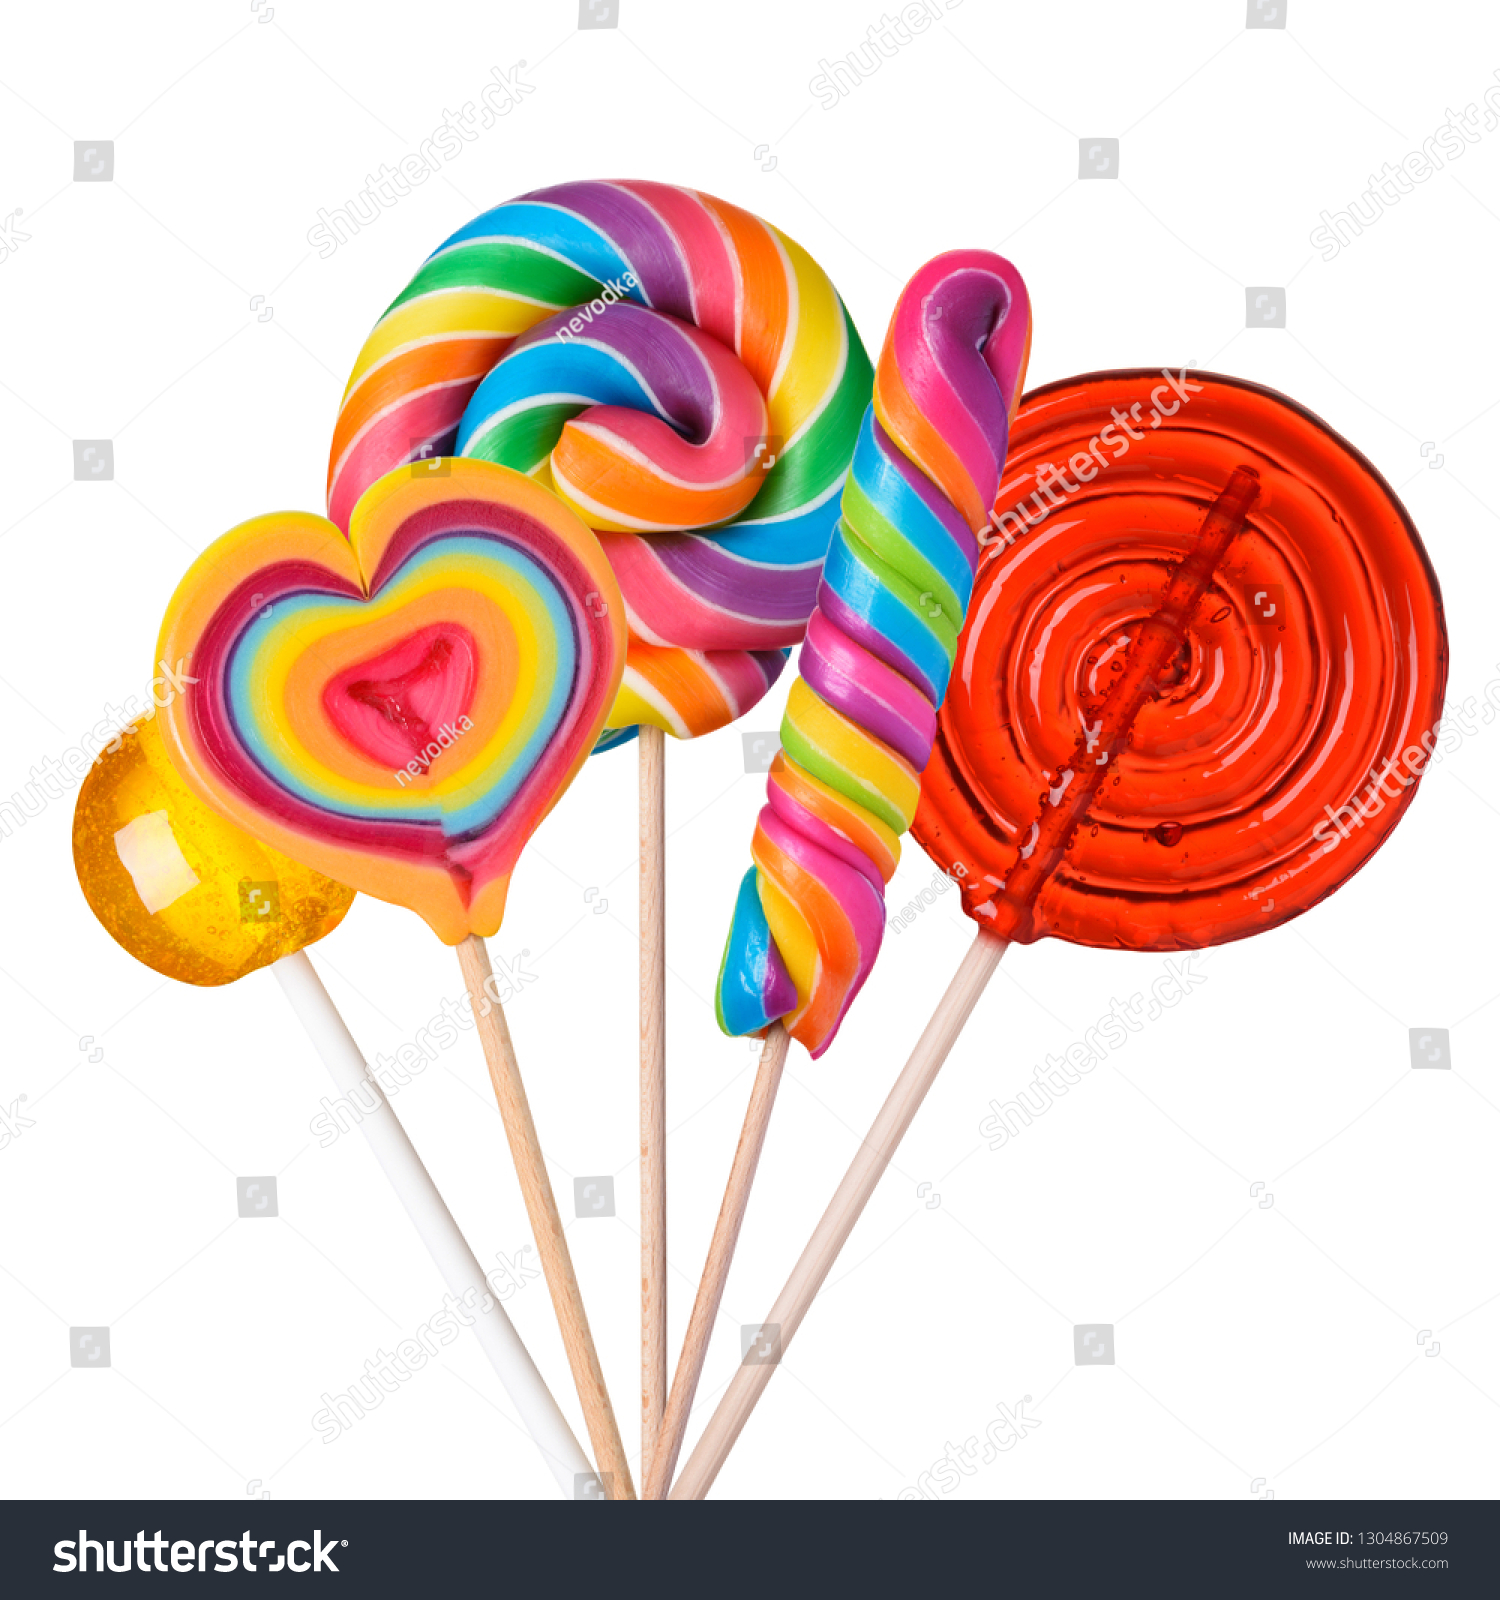 Lollipop candy set. Different sugar candies on sticks assortment isolated on white background. #1304867509